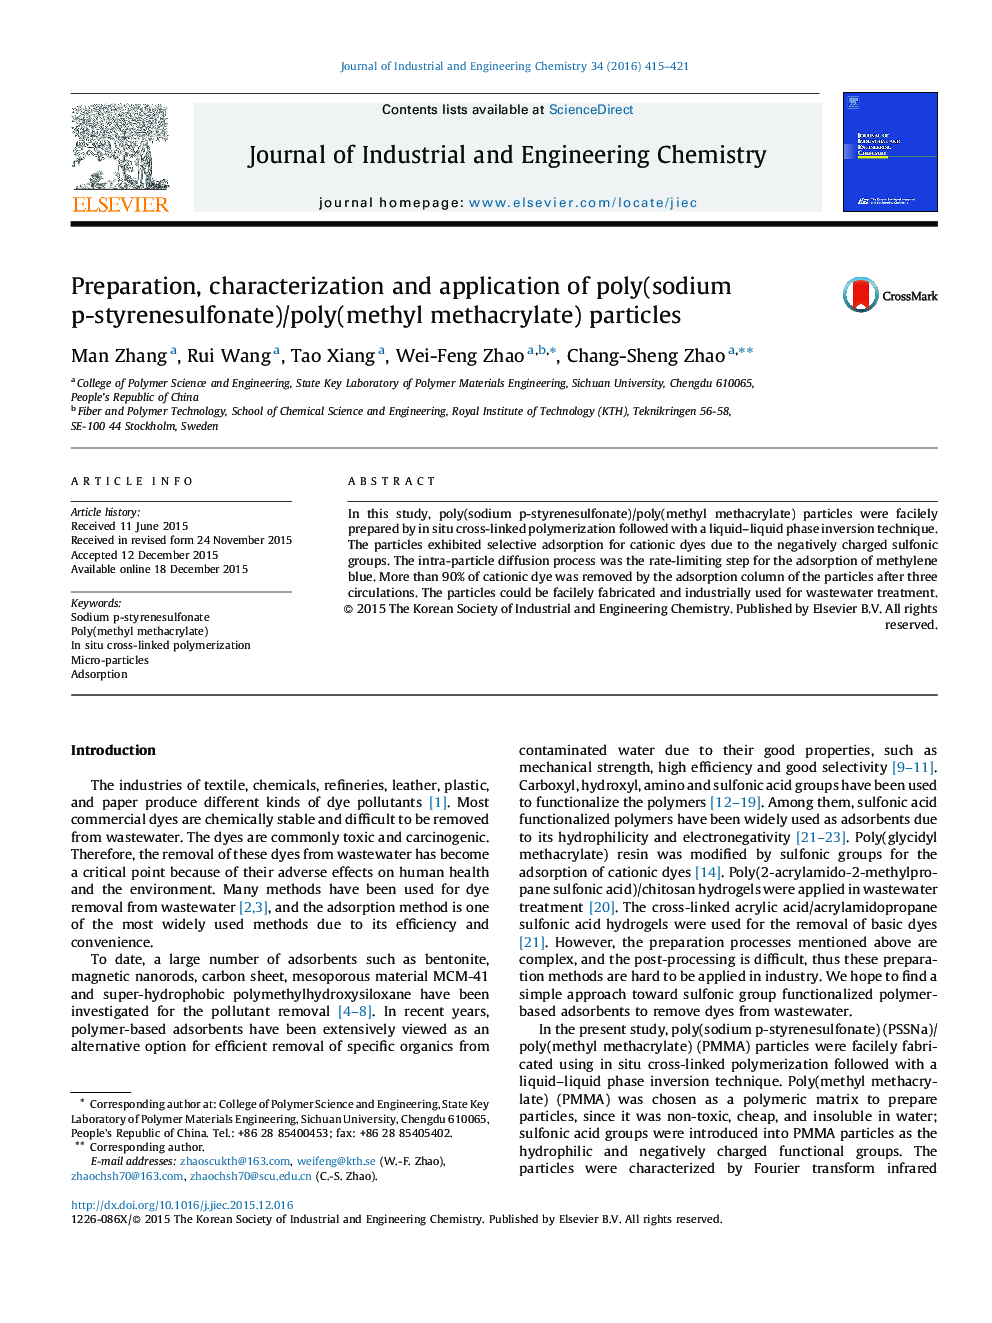 Preparation, characterization and application of poly(sodium p-styrenesulfonate)/poly(methyl methacrylate) particles